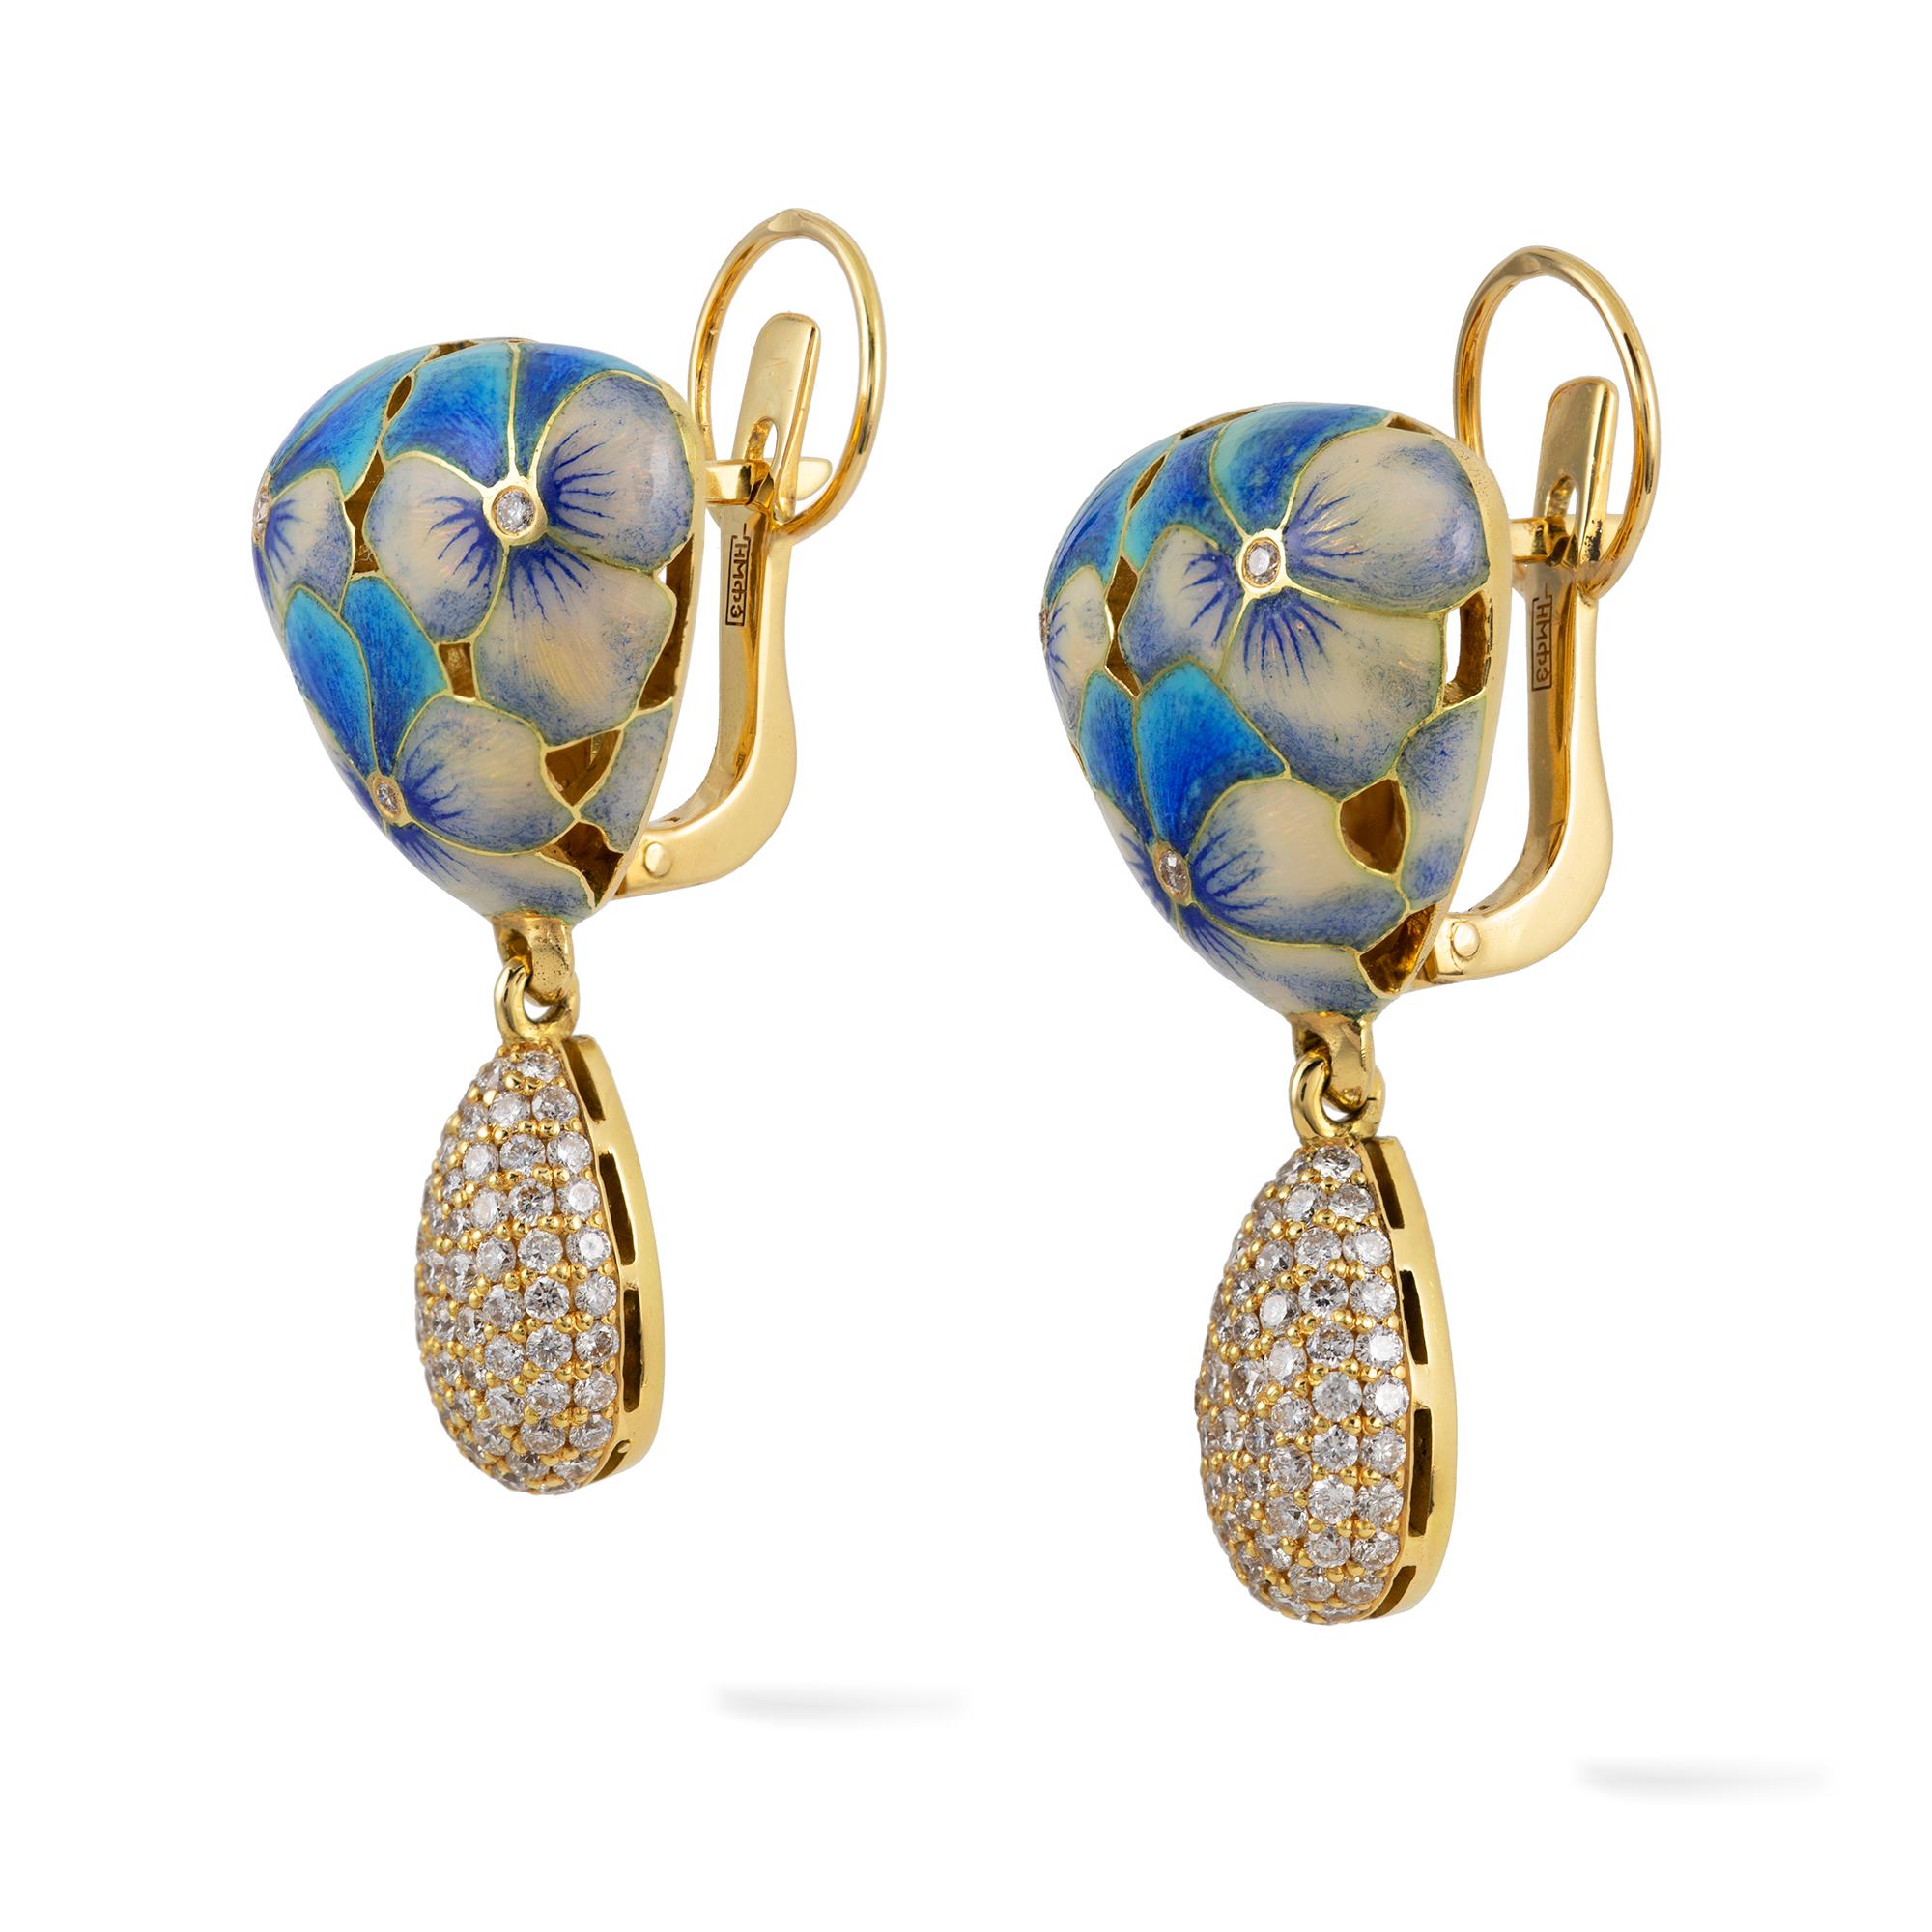 A pair of Viola Tricolor earrings by Ilgiz F, each with a triangular top of openwork design depicting three violas with champlevé enamelled petals and diamond encrusted stamens, suspending a pear-shaped drop, with diamond encrusted front and